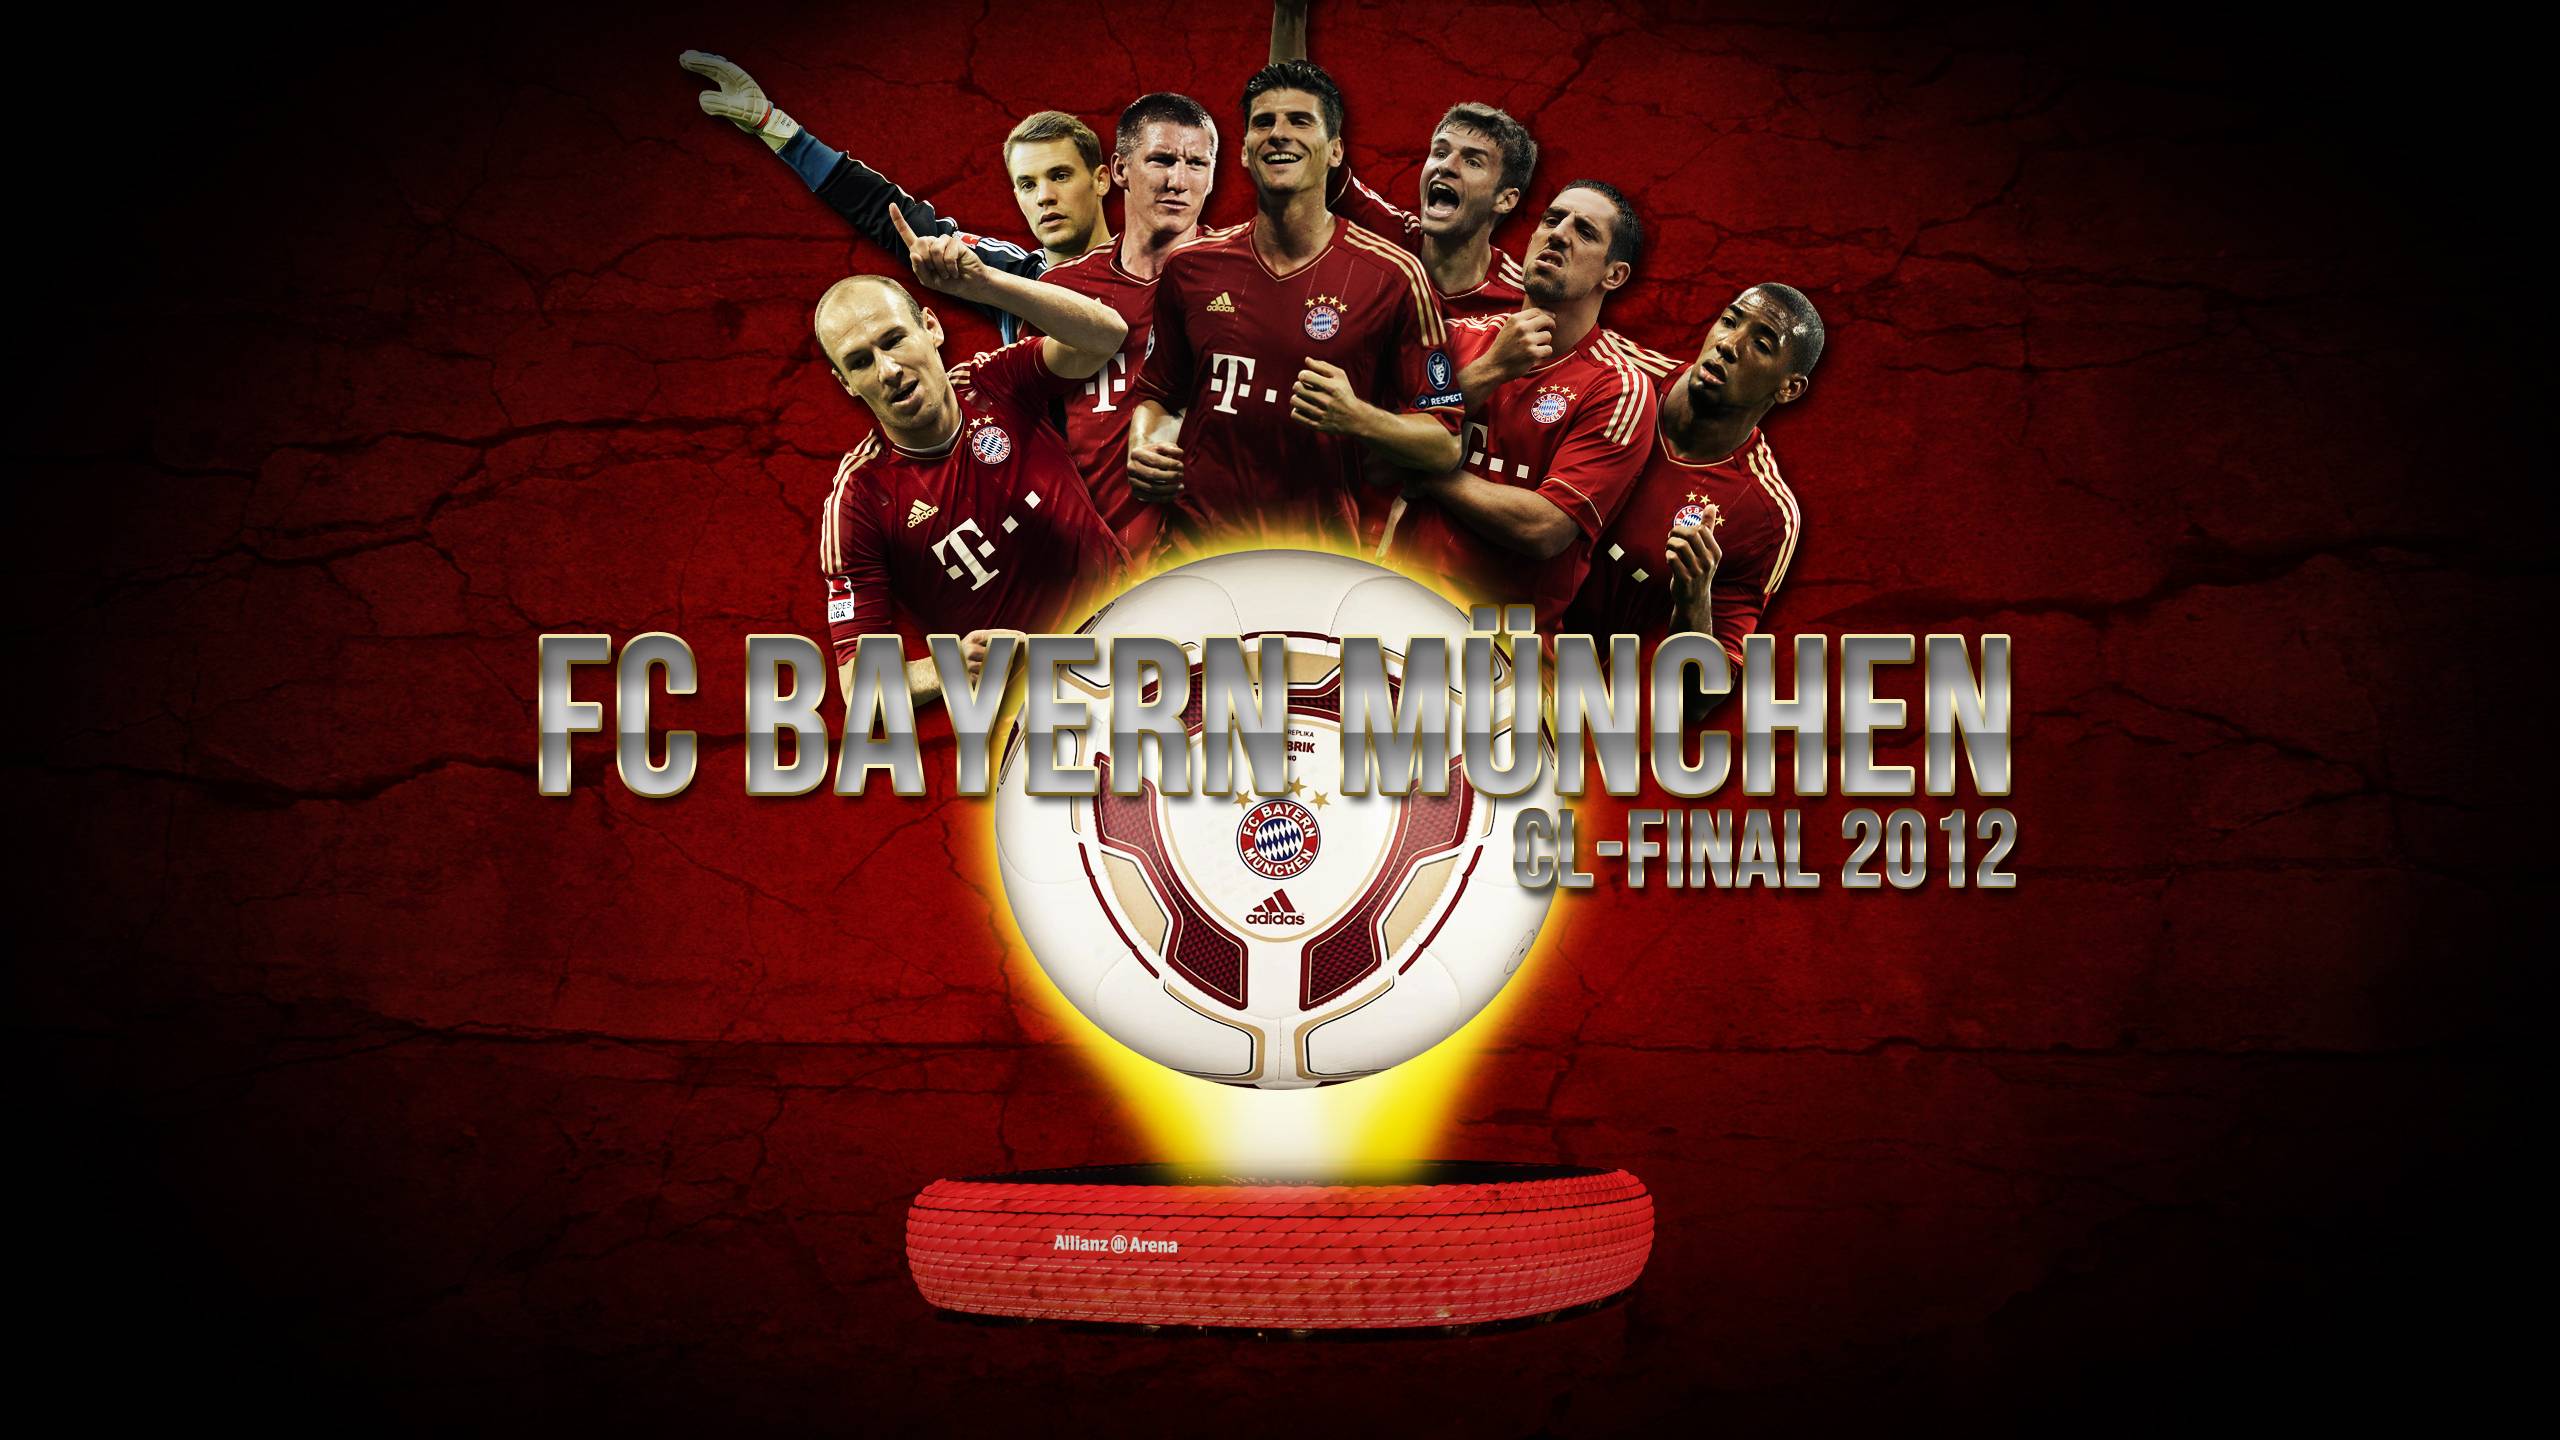 fc bayern wallpaper (Jan 06 2013 08:20:19) Picture Gallery